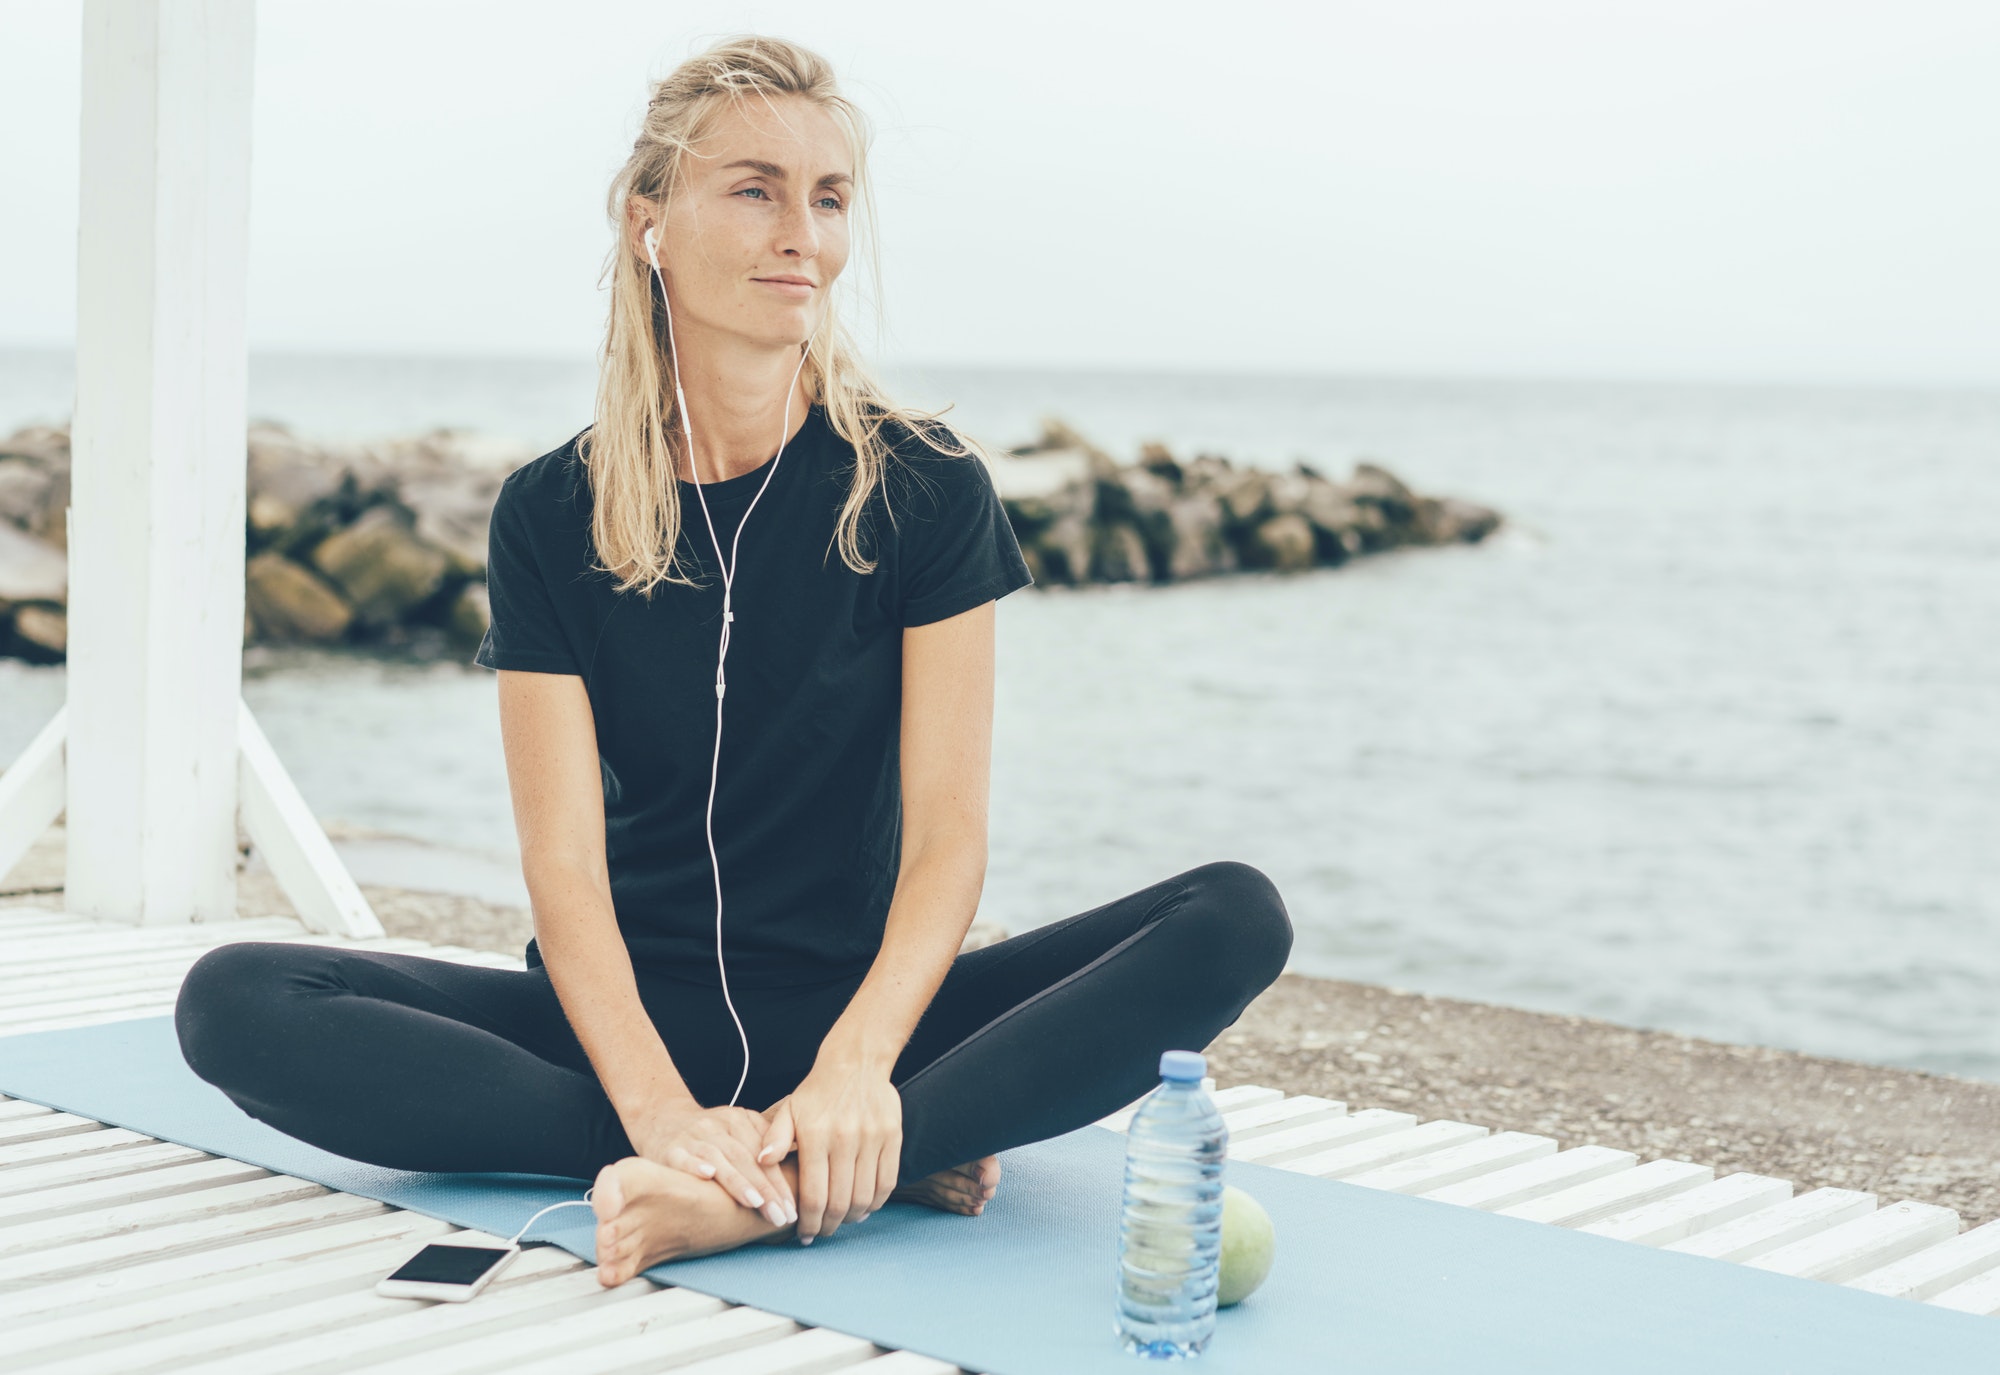 Woman resting outside after sports workout and listening to music or meditation on headphones.